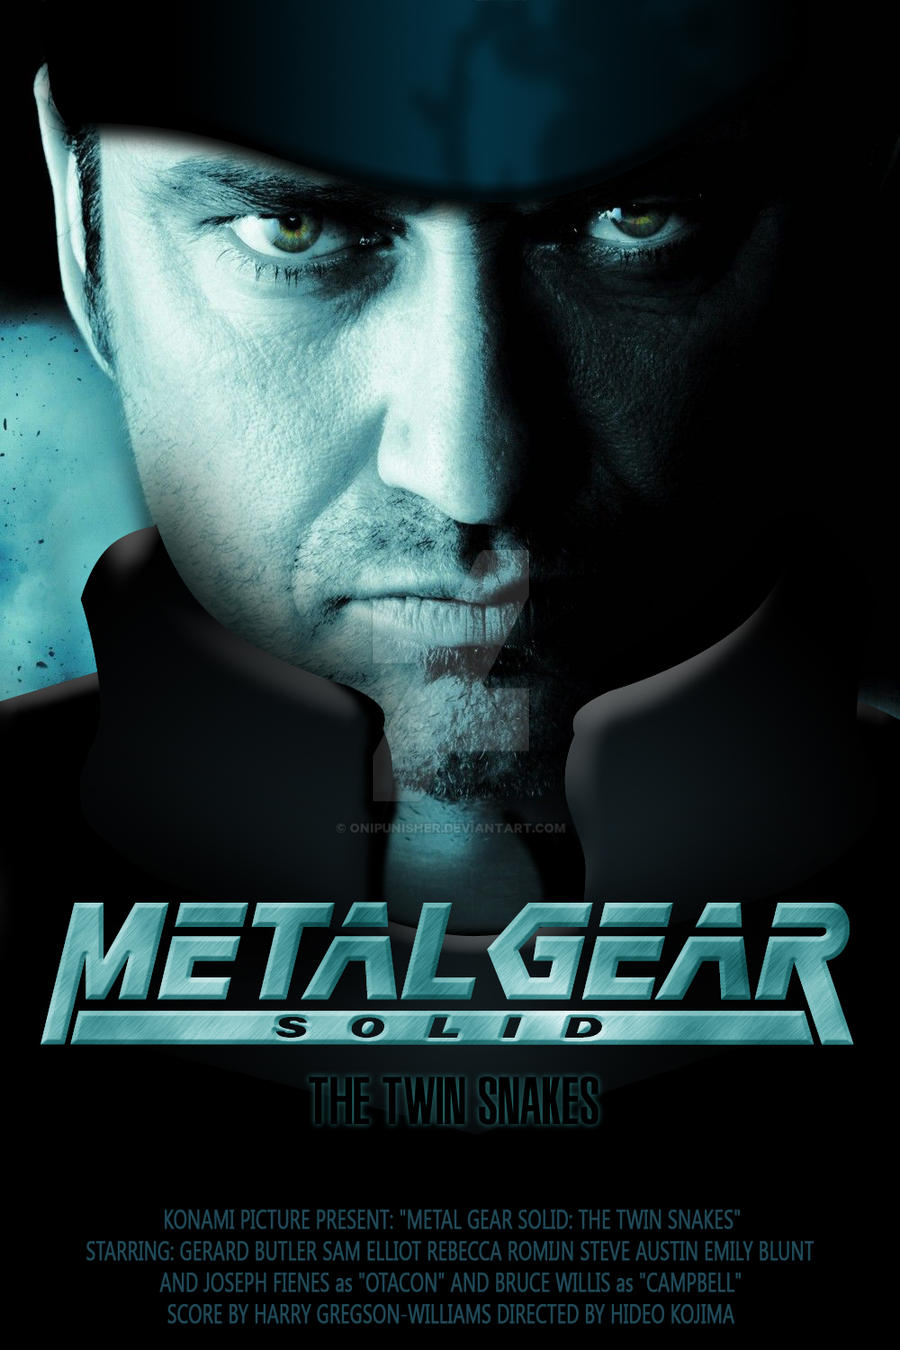 Mass Effect, Uncharted and Metal Gear SolidTHE MOVIES 